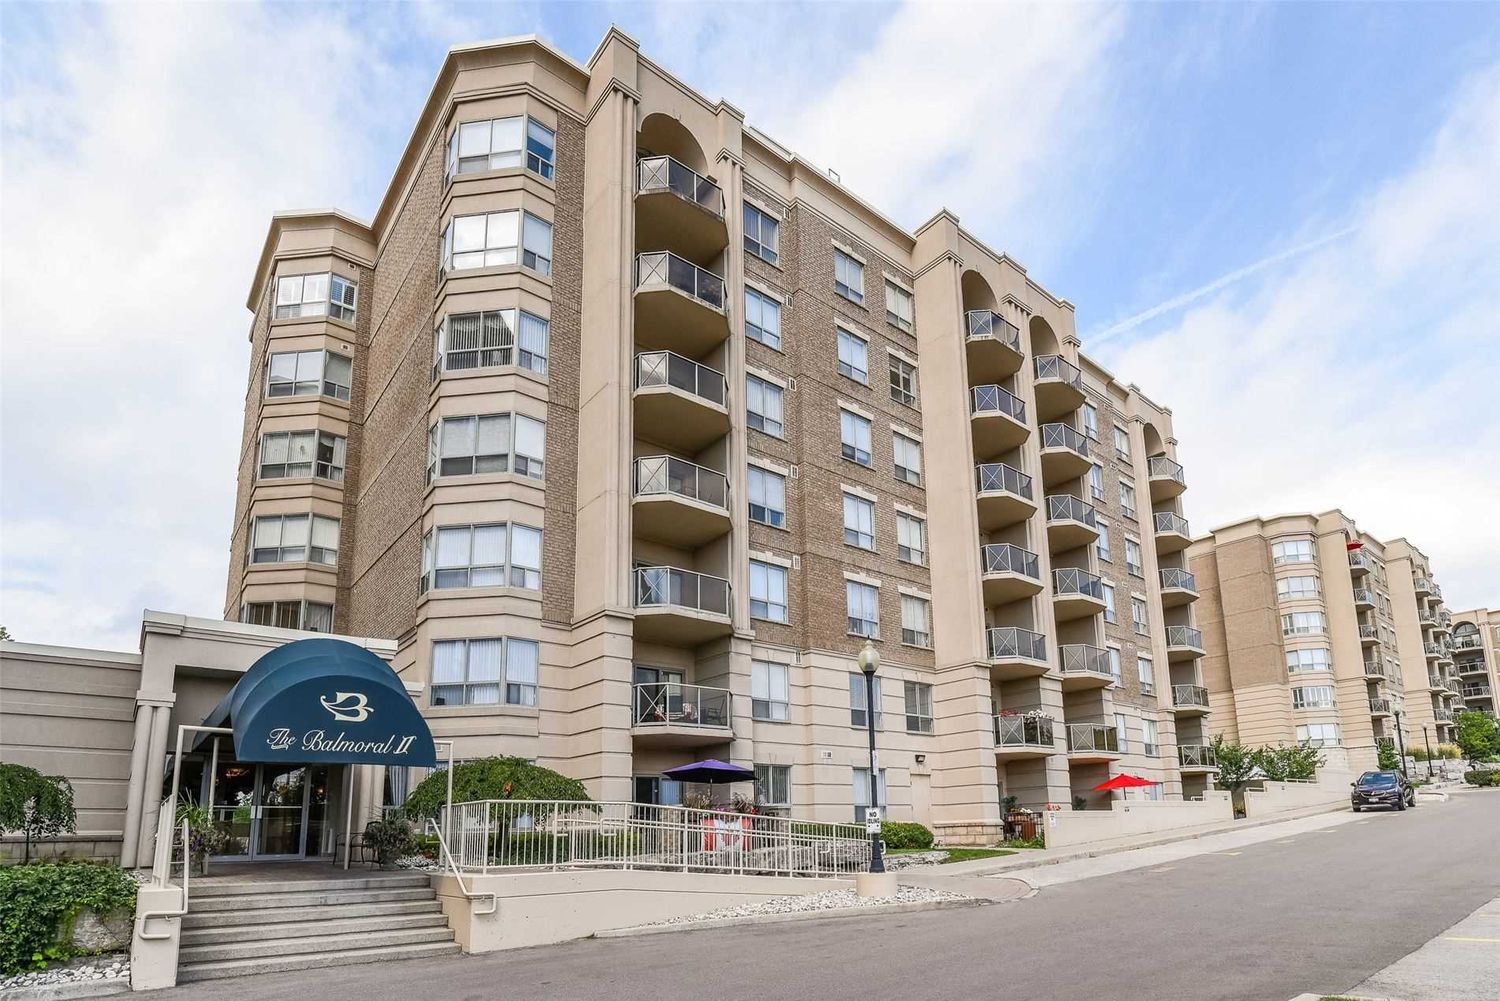 2085 Amherst Heights Drive. Balmoral II Condos is located in  Burlington, Toronto - image #1 of 2